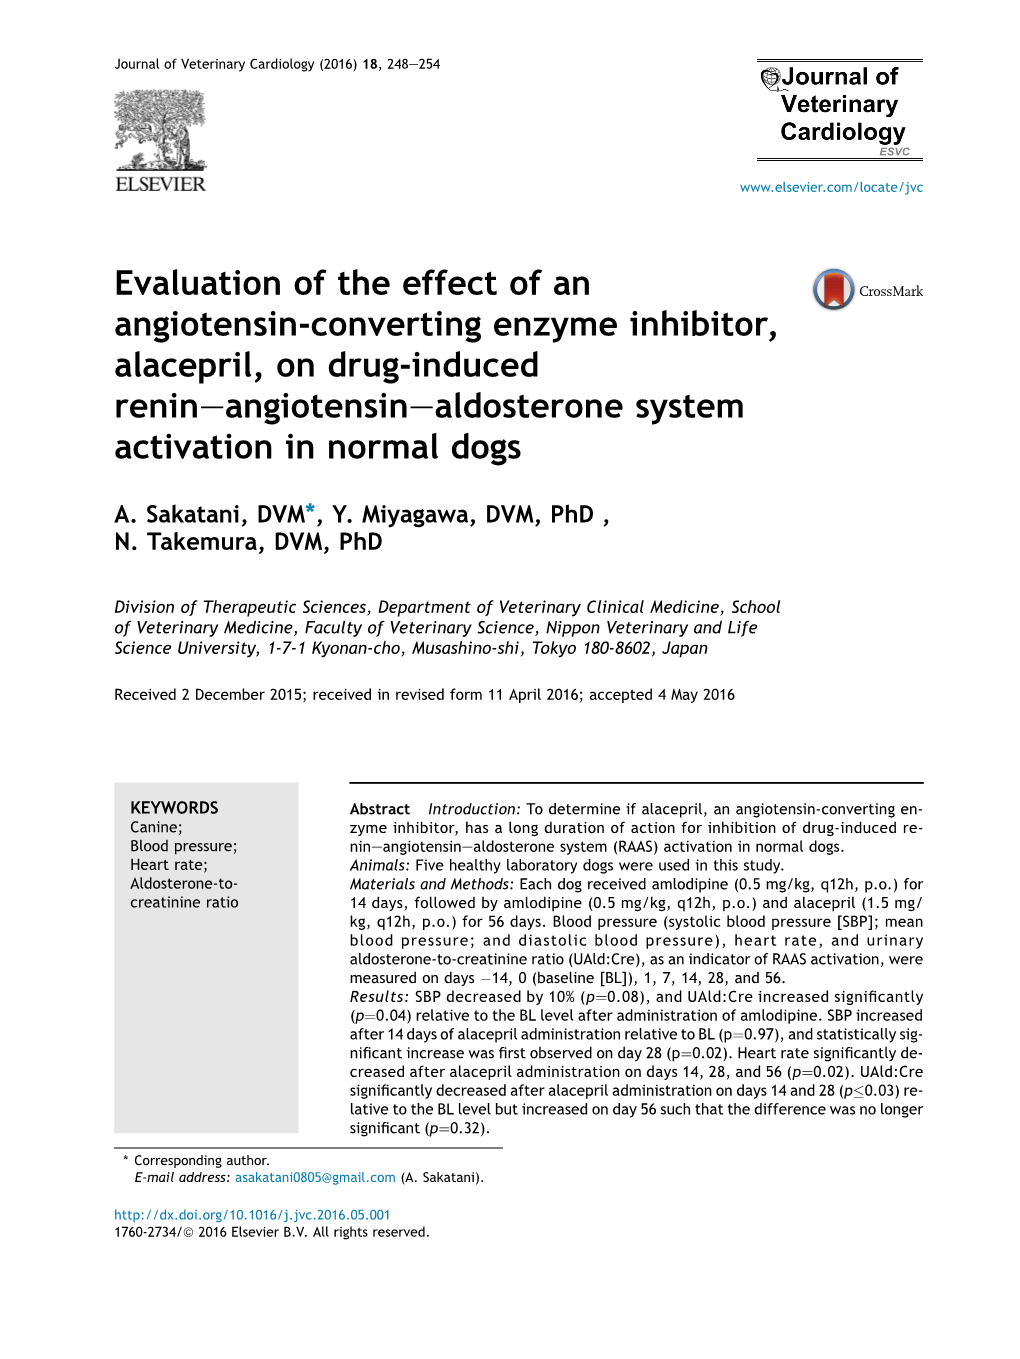 Evaluation of the Effect of an Angiotensin-Converting Enzyme Inhibitor, Alacepril, on Drug-Induced Renineangiotensinealdosterone System Activation in Normal Dogs